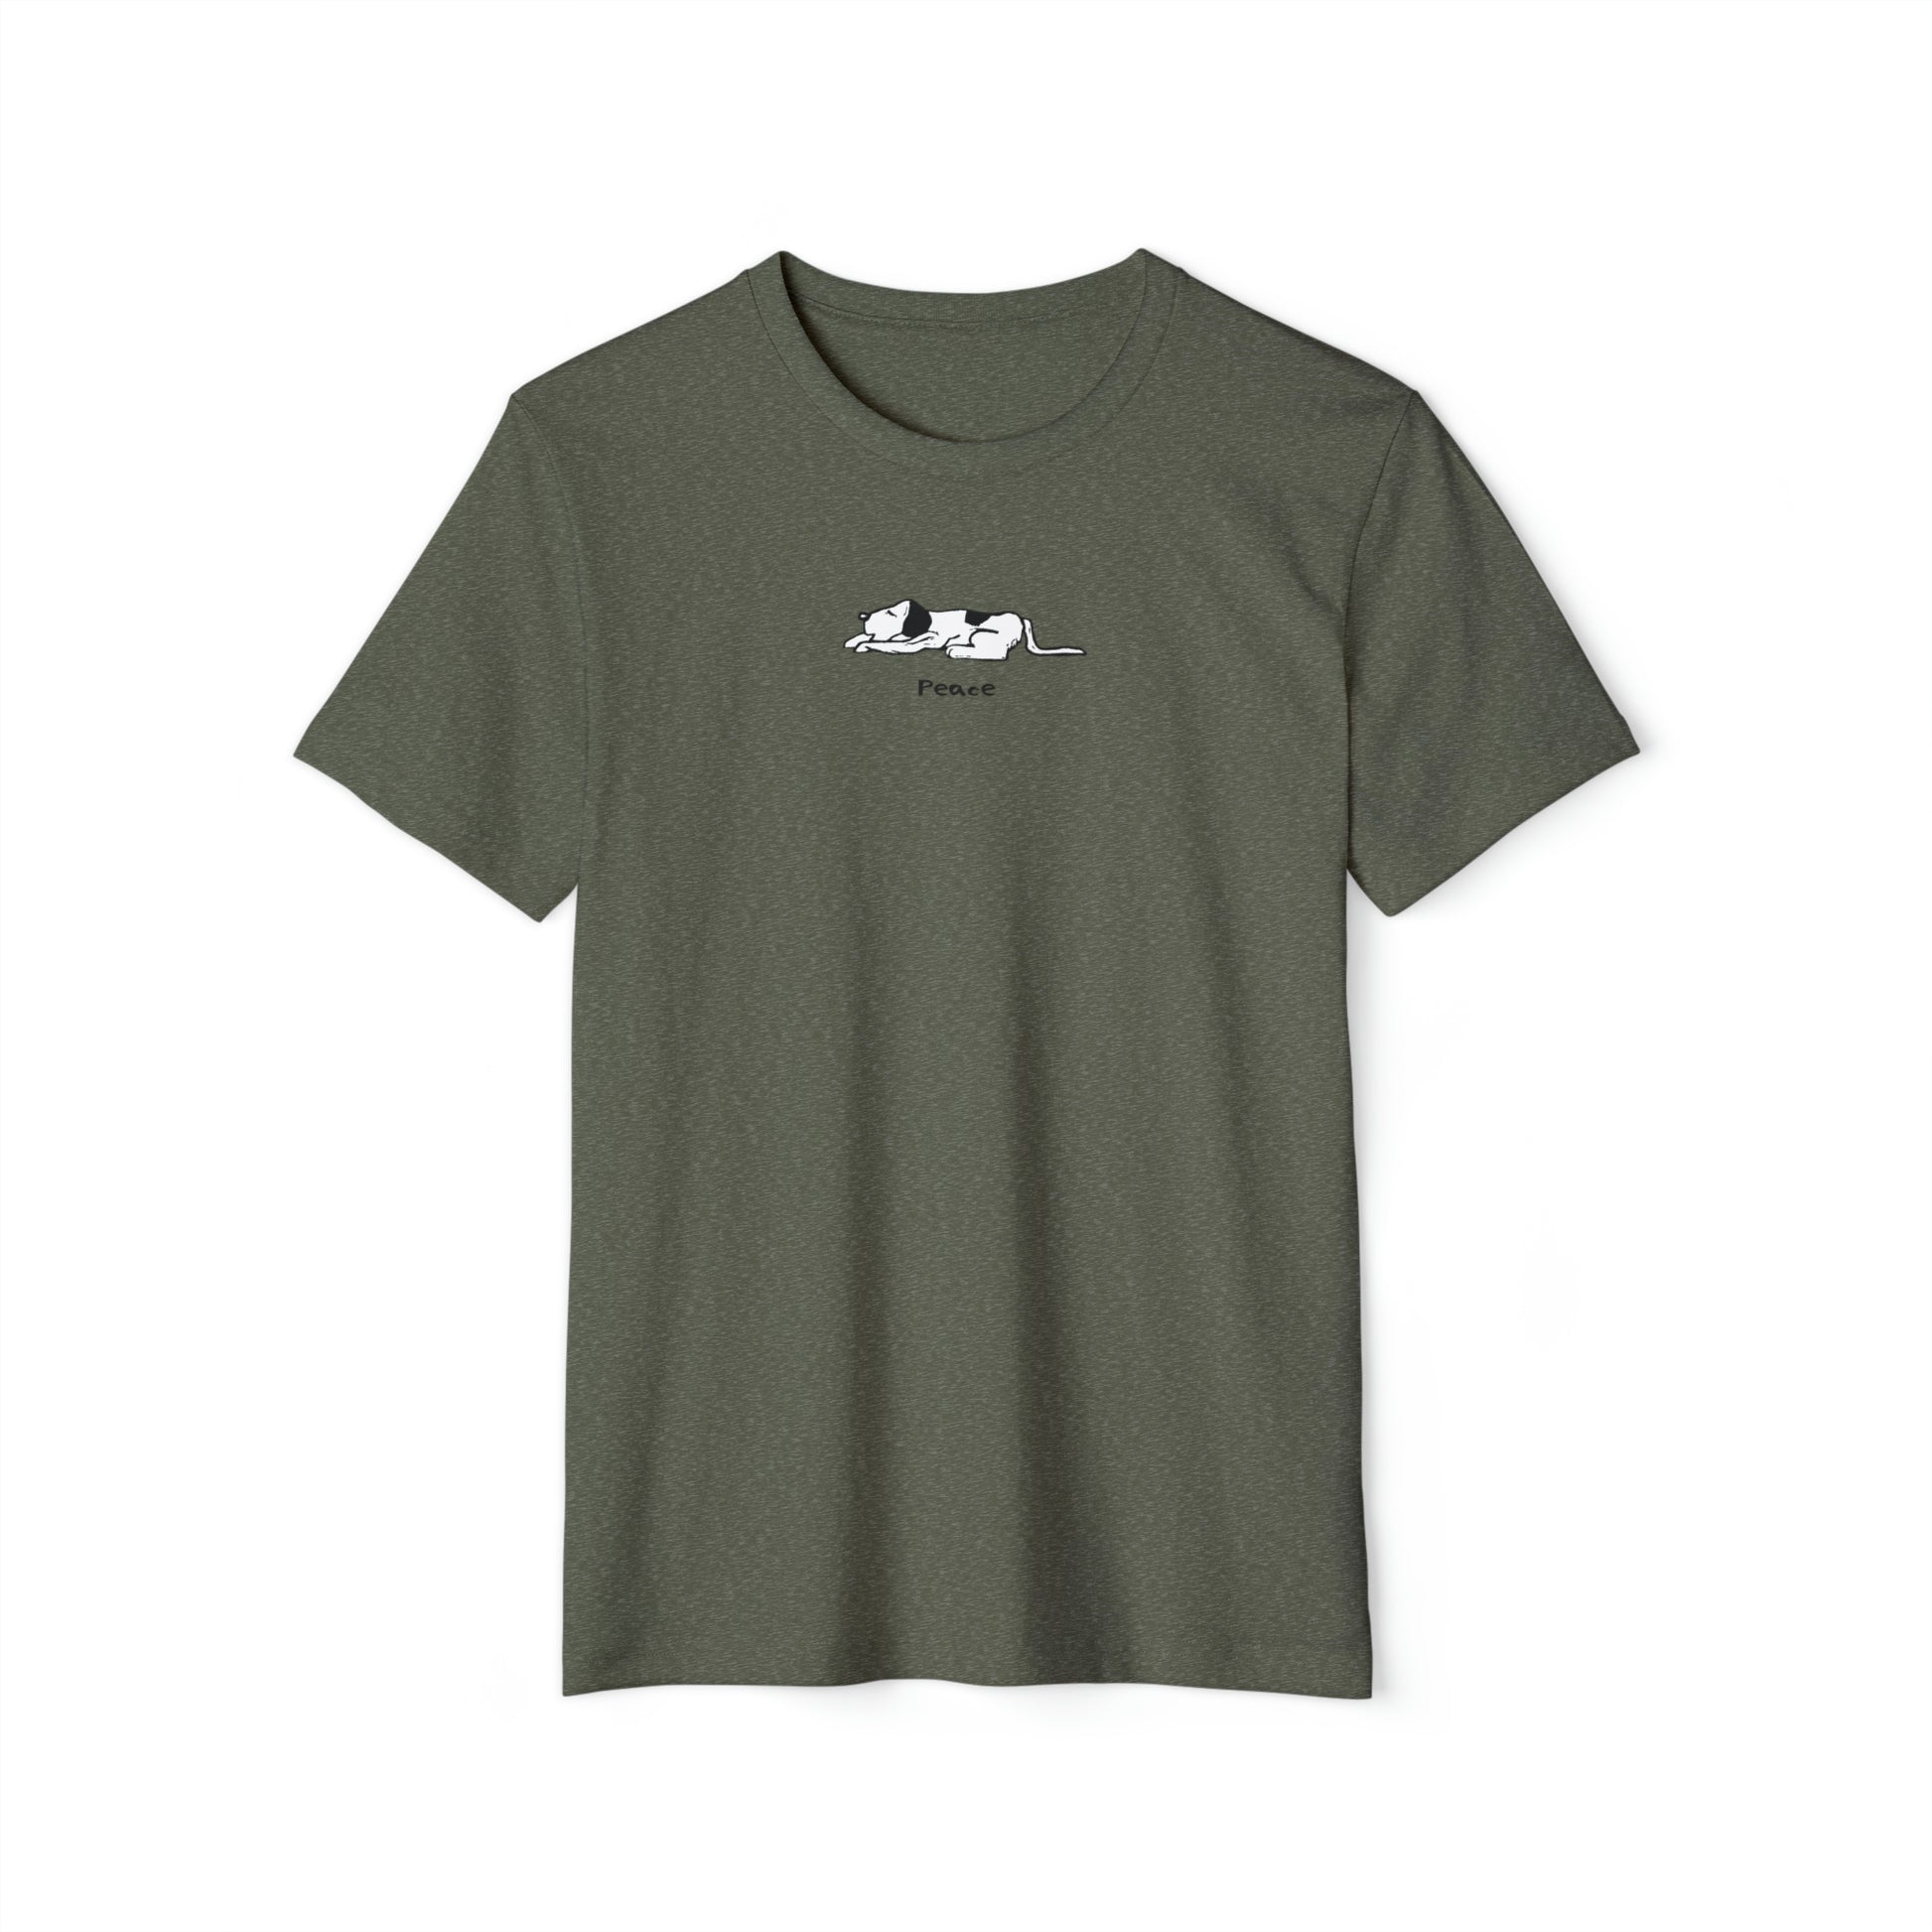 Black and white lying down sleeping dog on heather green color unisex men's t-shirt.  Text under image says Peace.